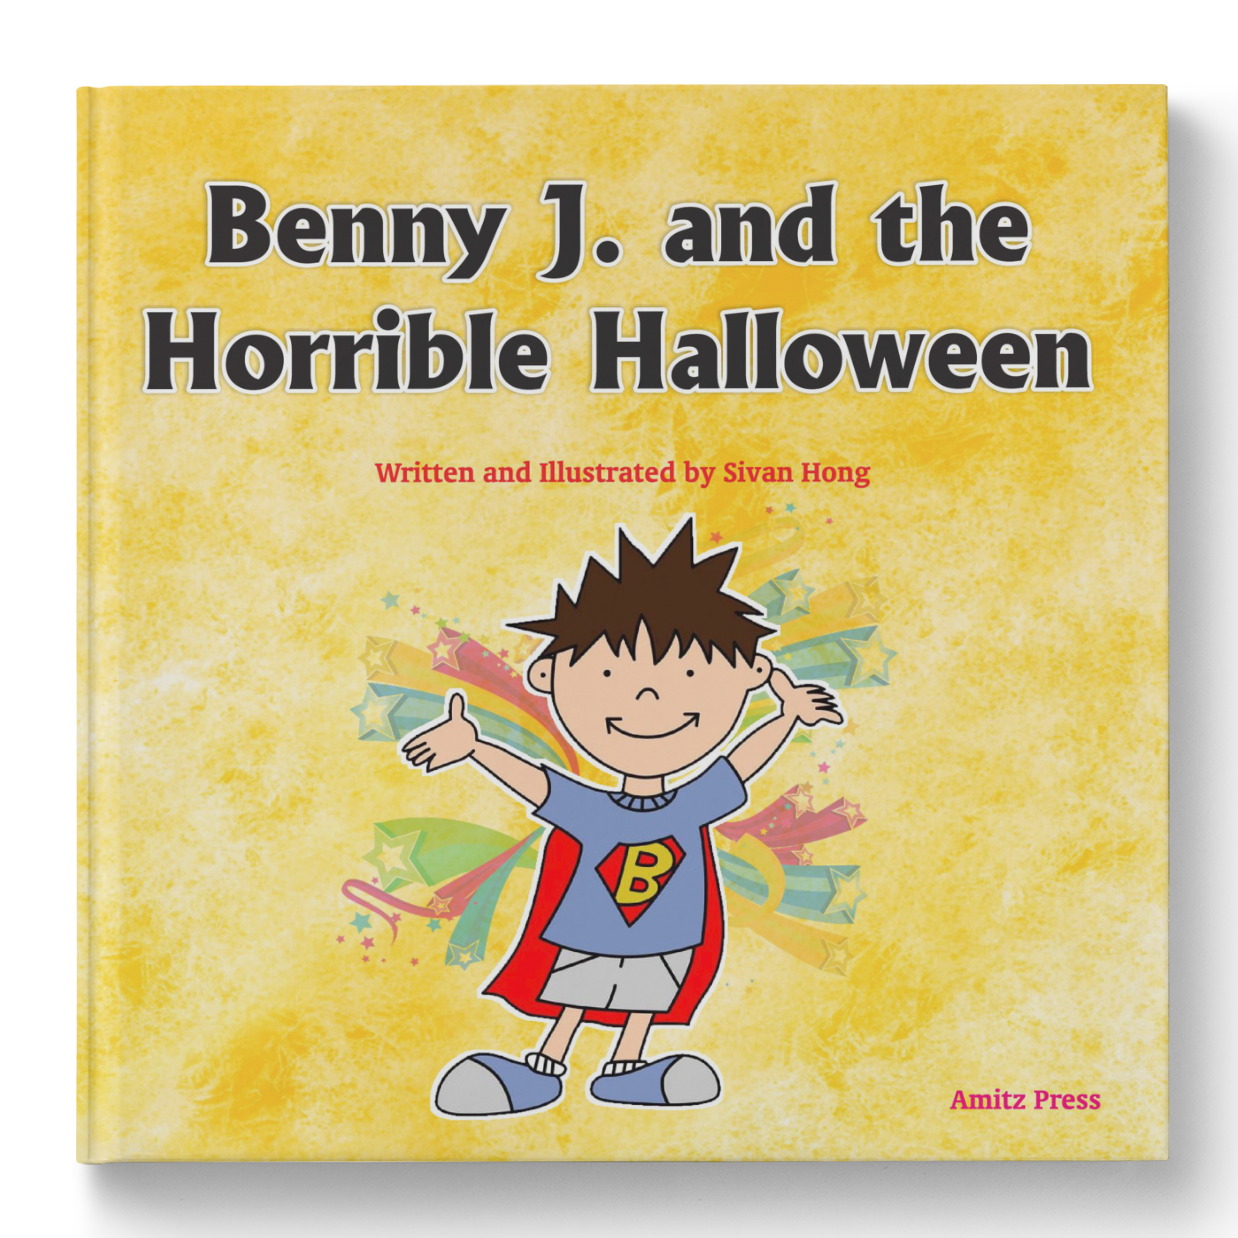 Benny J. and the Horrible Halloween